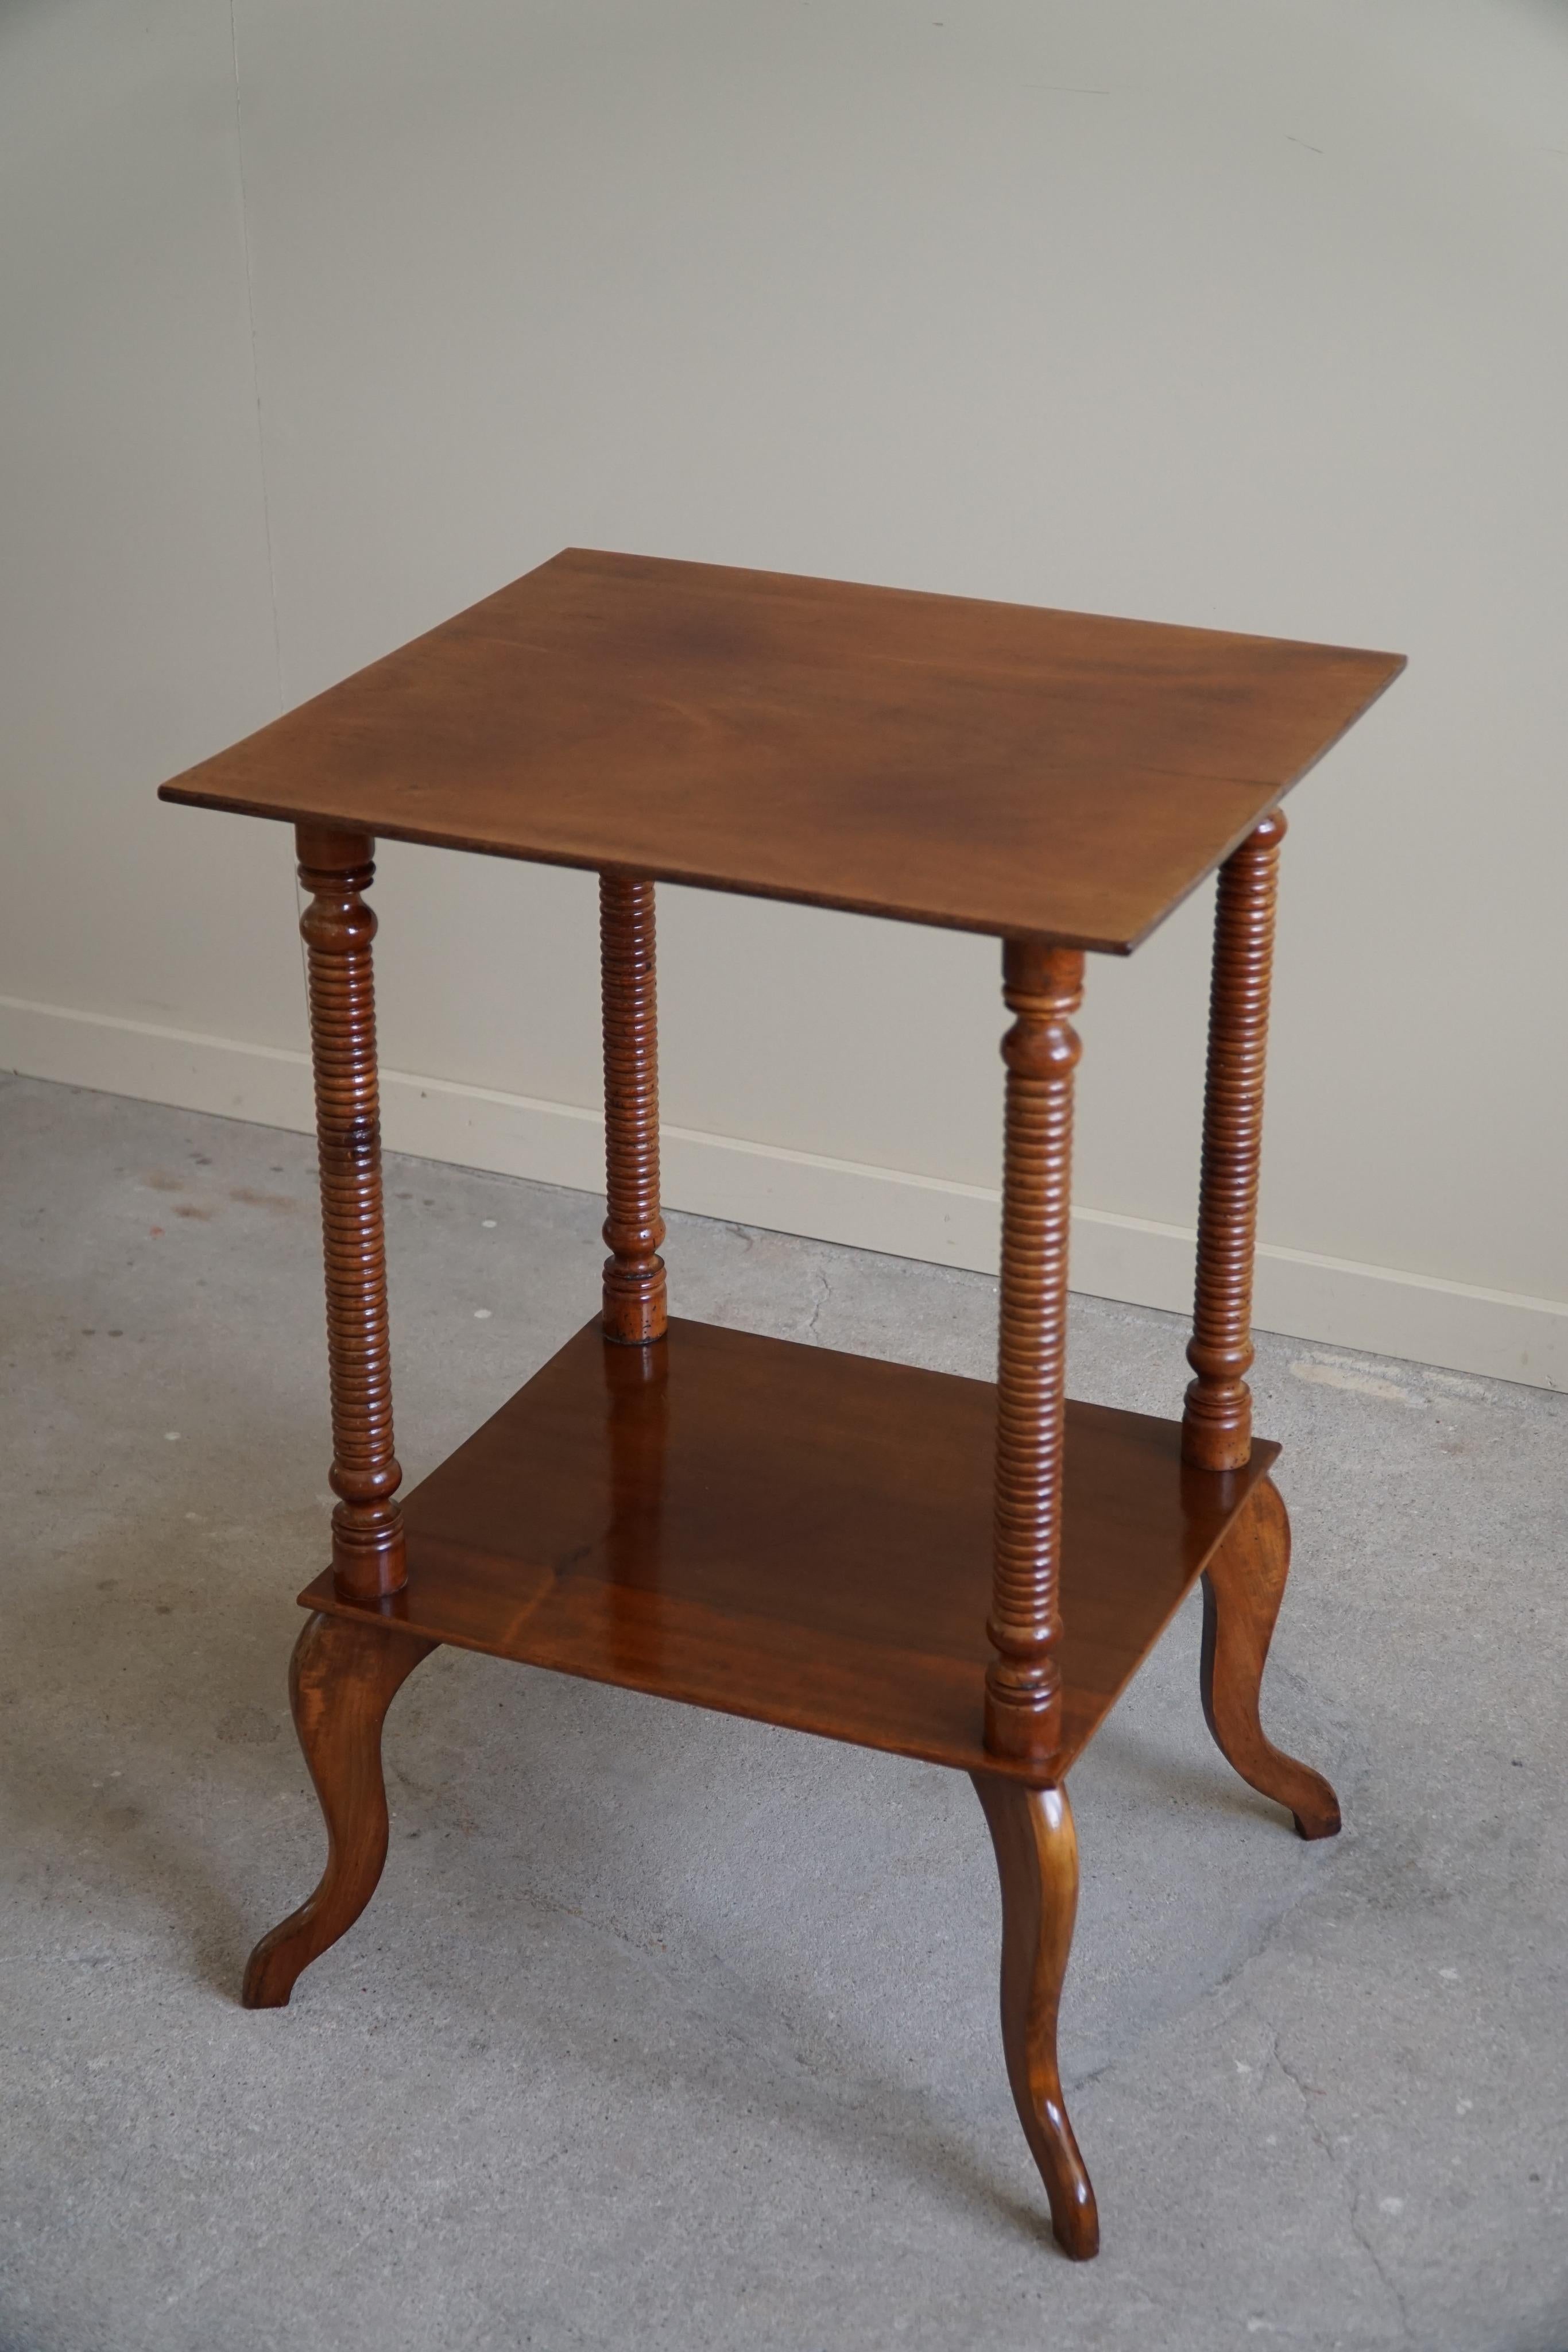 Nutwood Danish Side Table / Pedestal with Finely Carved Legs, Early 20th Century For Sale